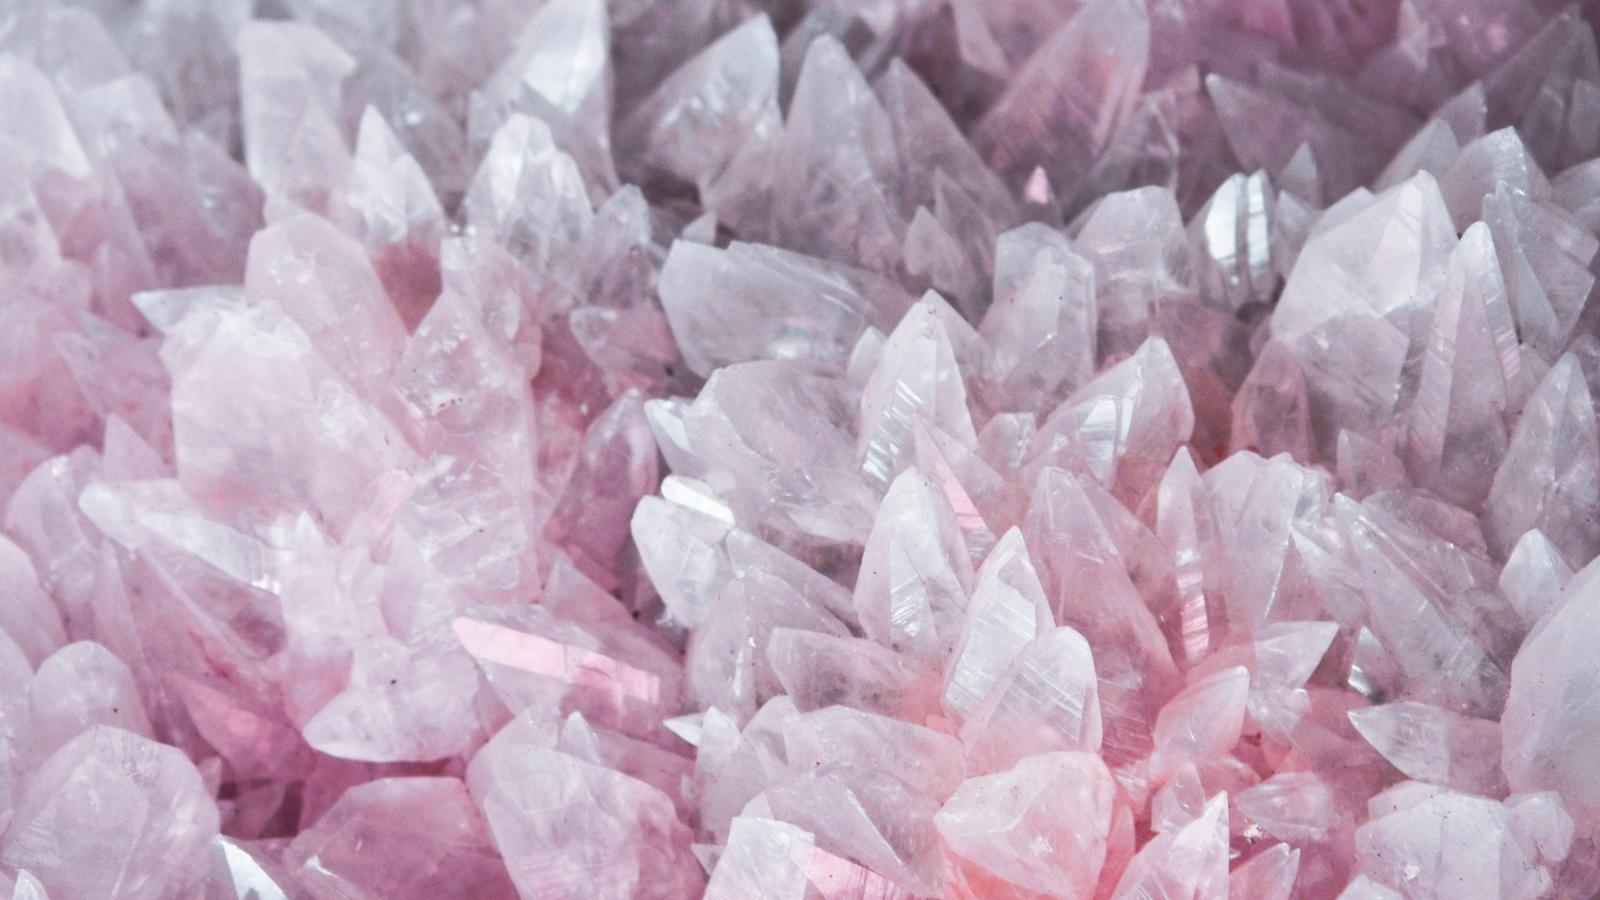 5 Powerful Crystals and Their Meanings